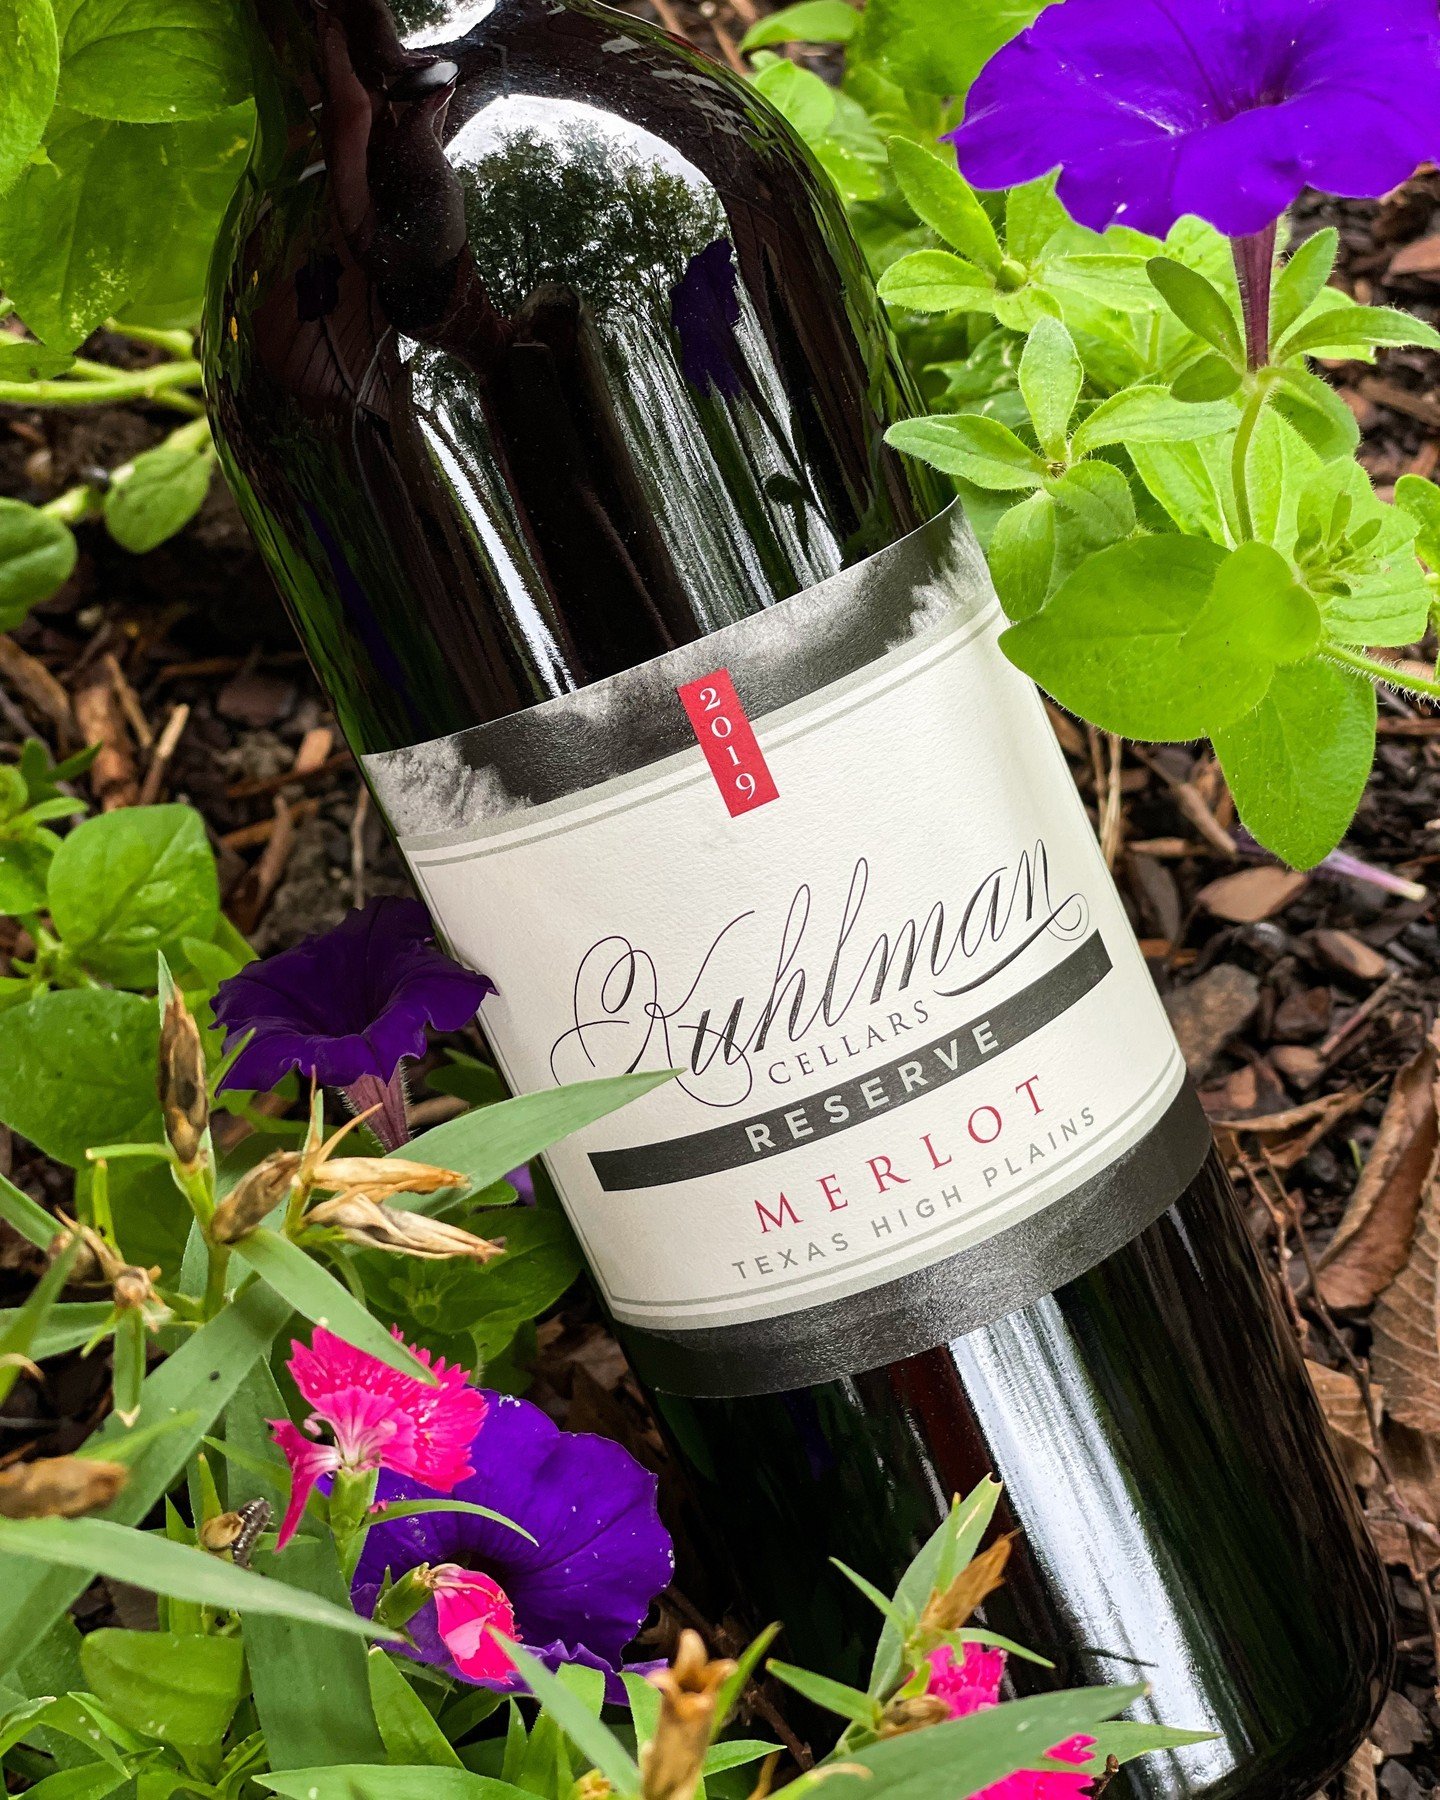 Our 2019 Reserve Merlot has aromas of oak, coffee and cocoa. This beautiful wine was aged in French oak barrel and has notes of Maraschino cherry, maple syrup and vanilla. 

Shop our wines on kuhlmancellars.com or pick up a bottle the next time you'r